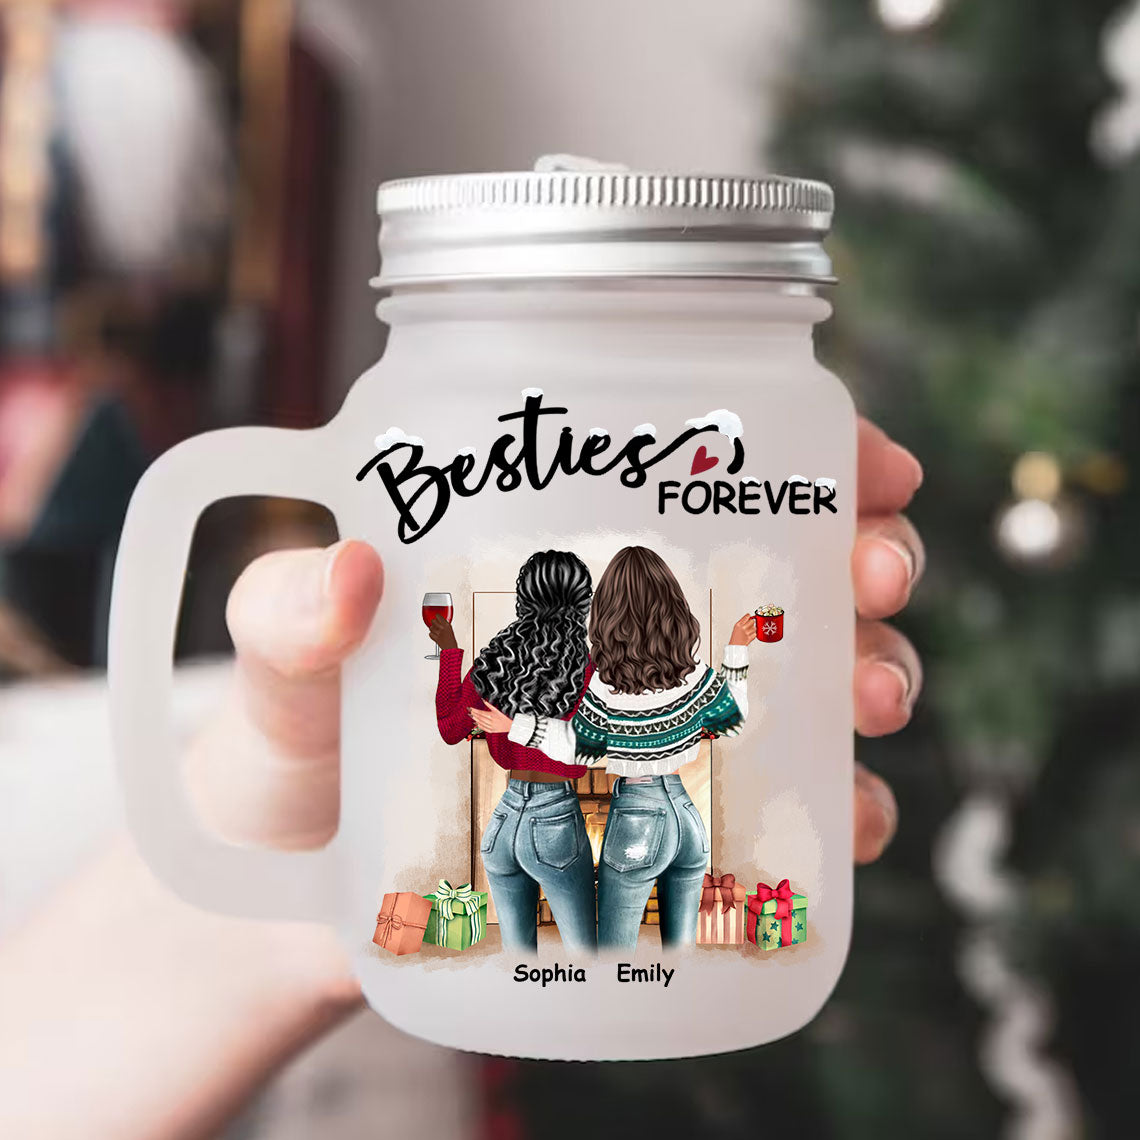 Besties Forever, Custom Appearances And Names - Personalized Mason Jar Cup With Straw